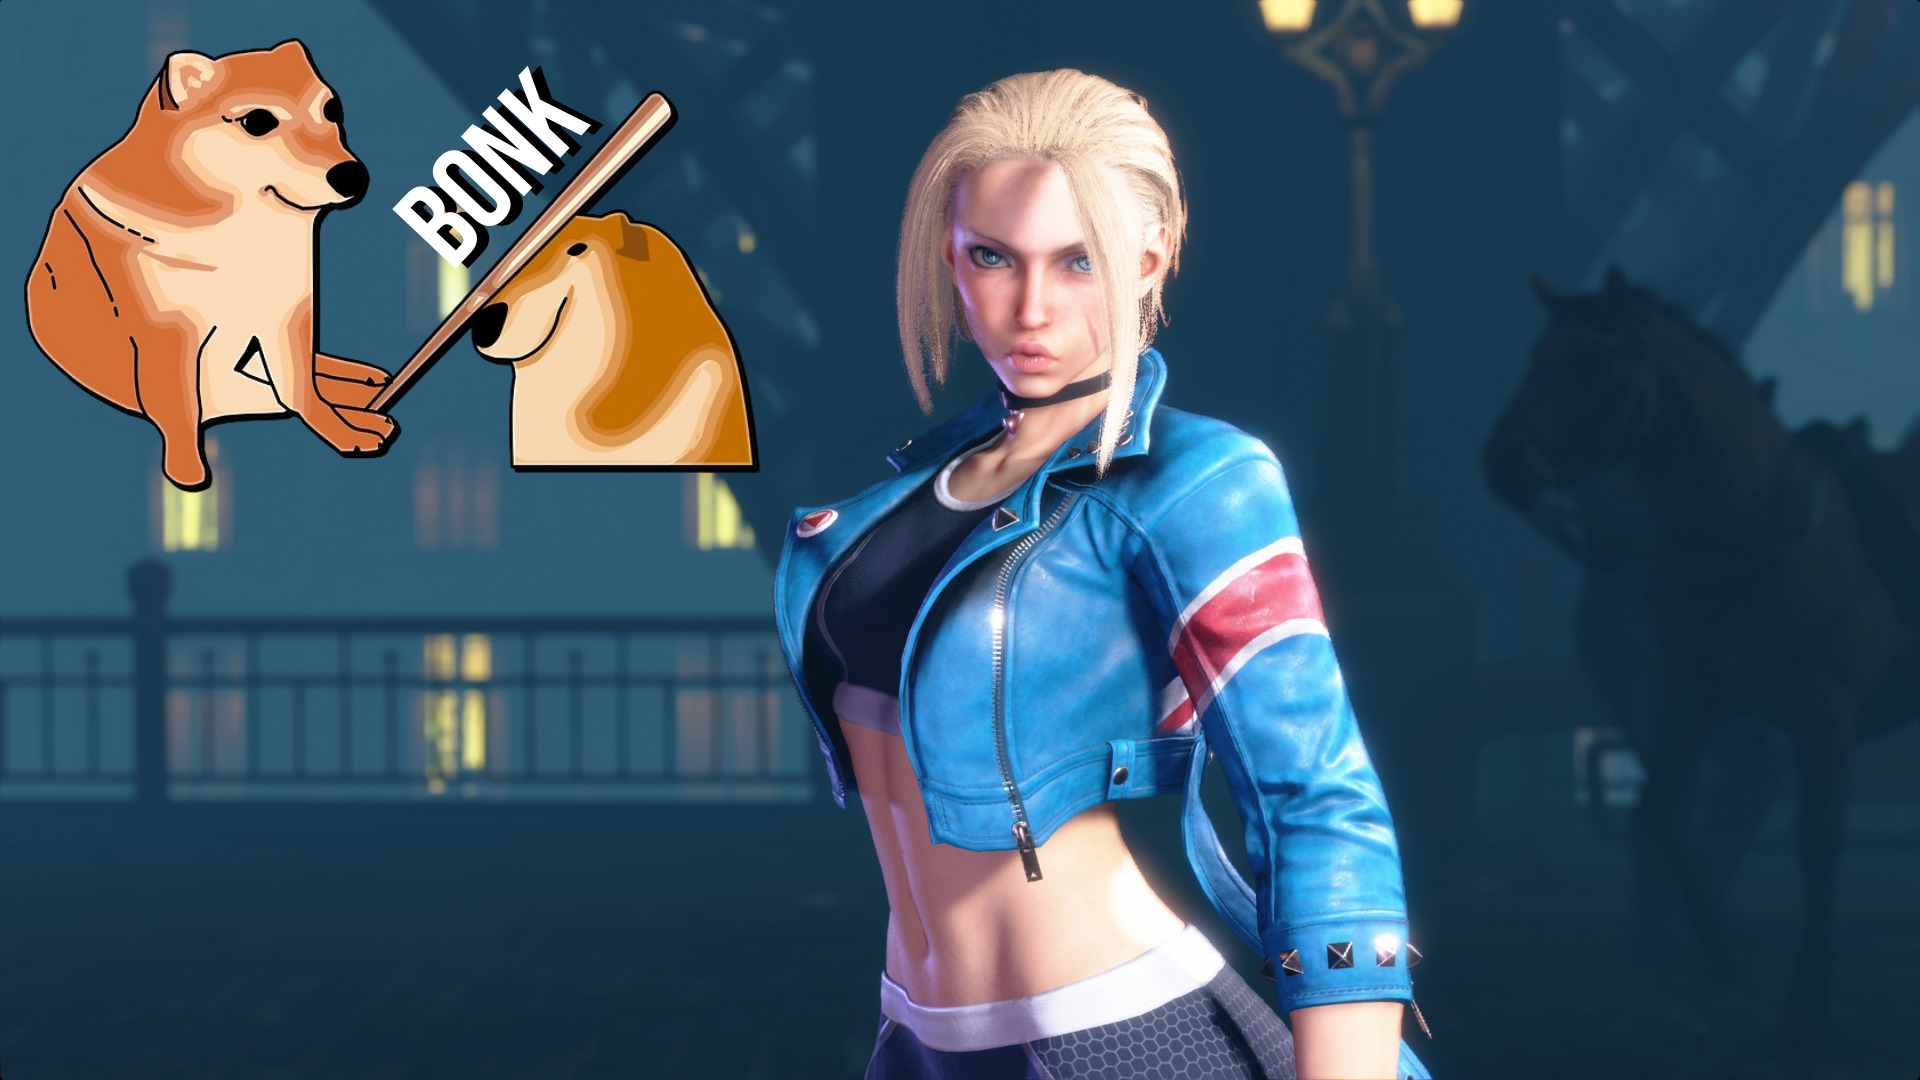 FGC Daily - Street Fighter 6 - Cammy Comparison🧐 She has a sharper jawline  and looks more adult now